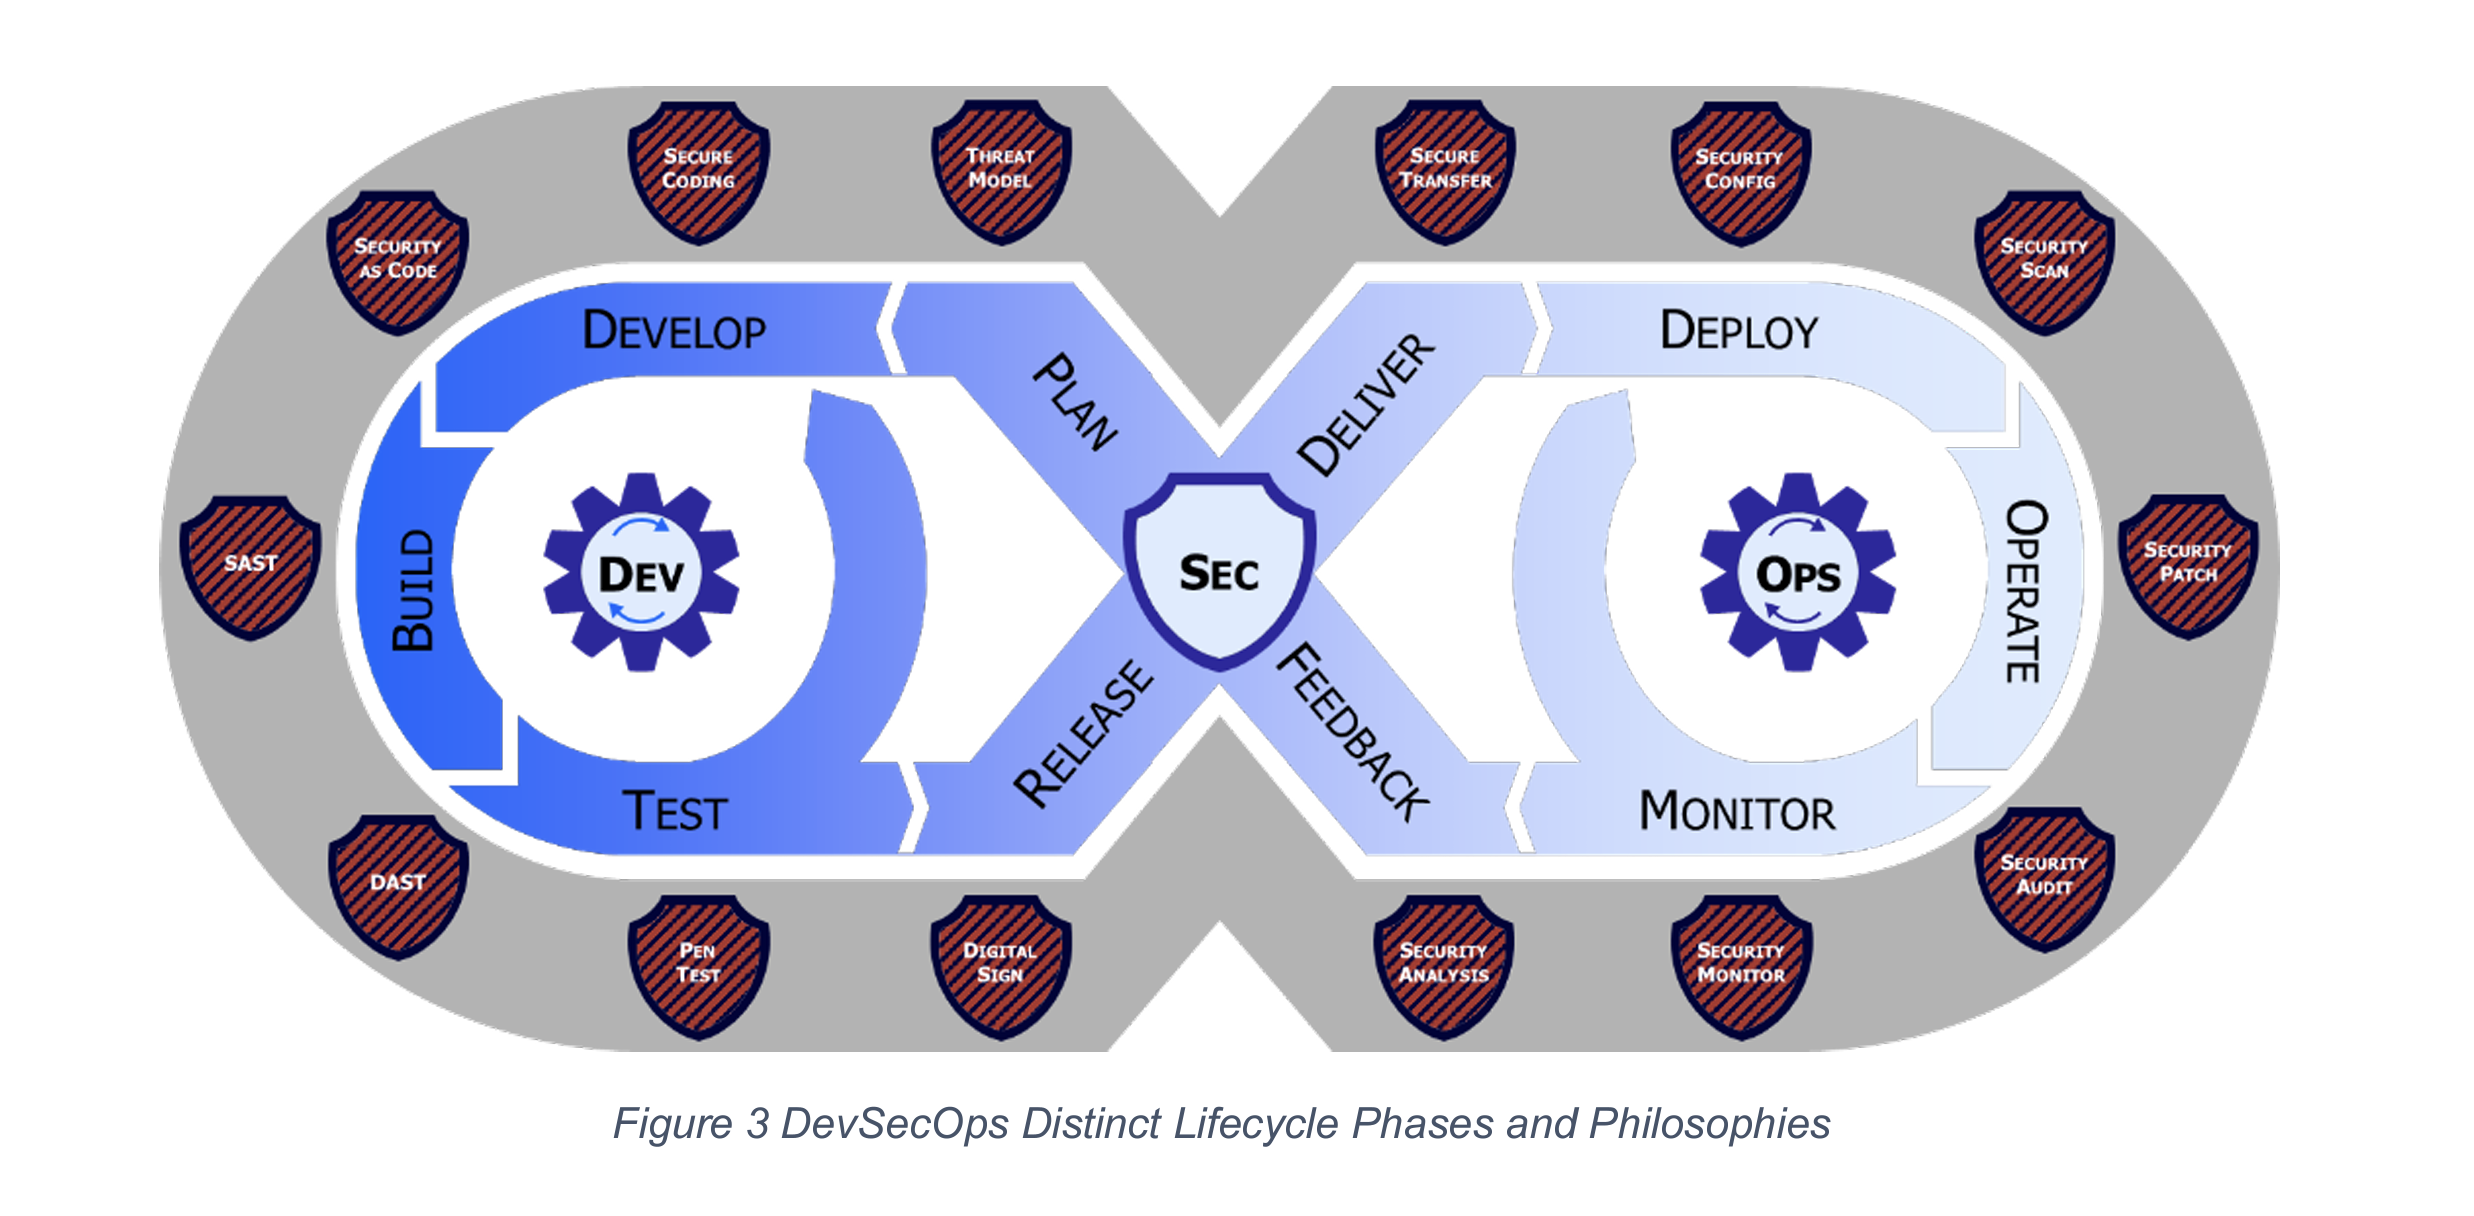 Chart describing the DevSecOps lifecycle